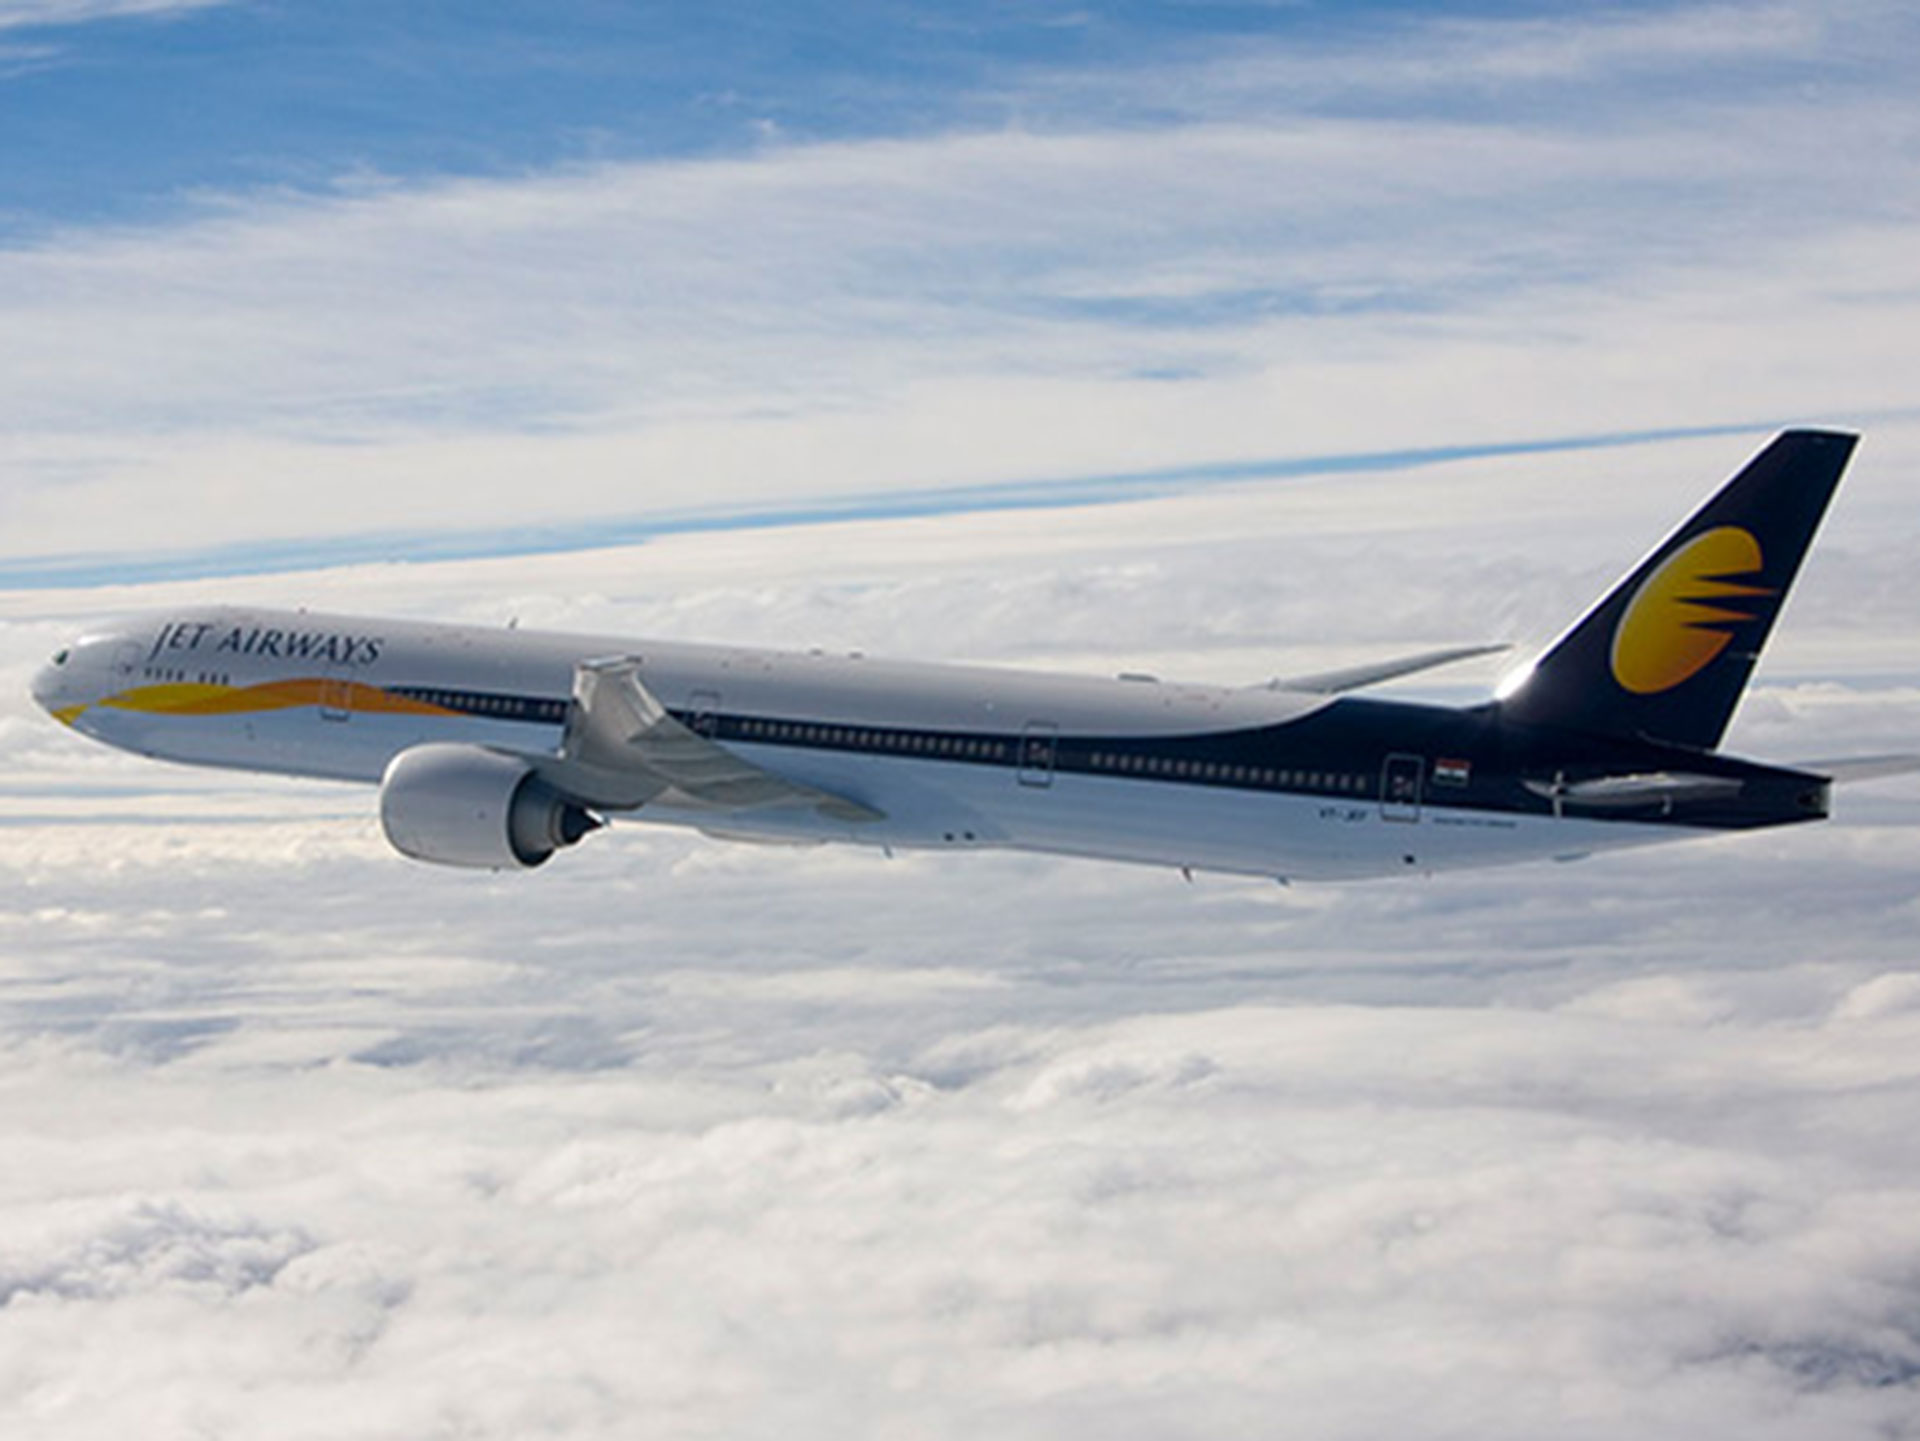 Baby born on Jet Airways gets a lifetime of free travel